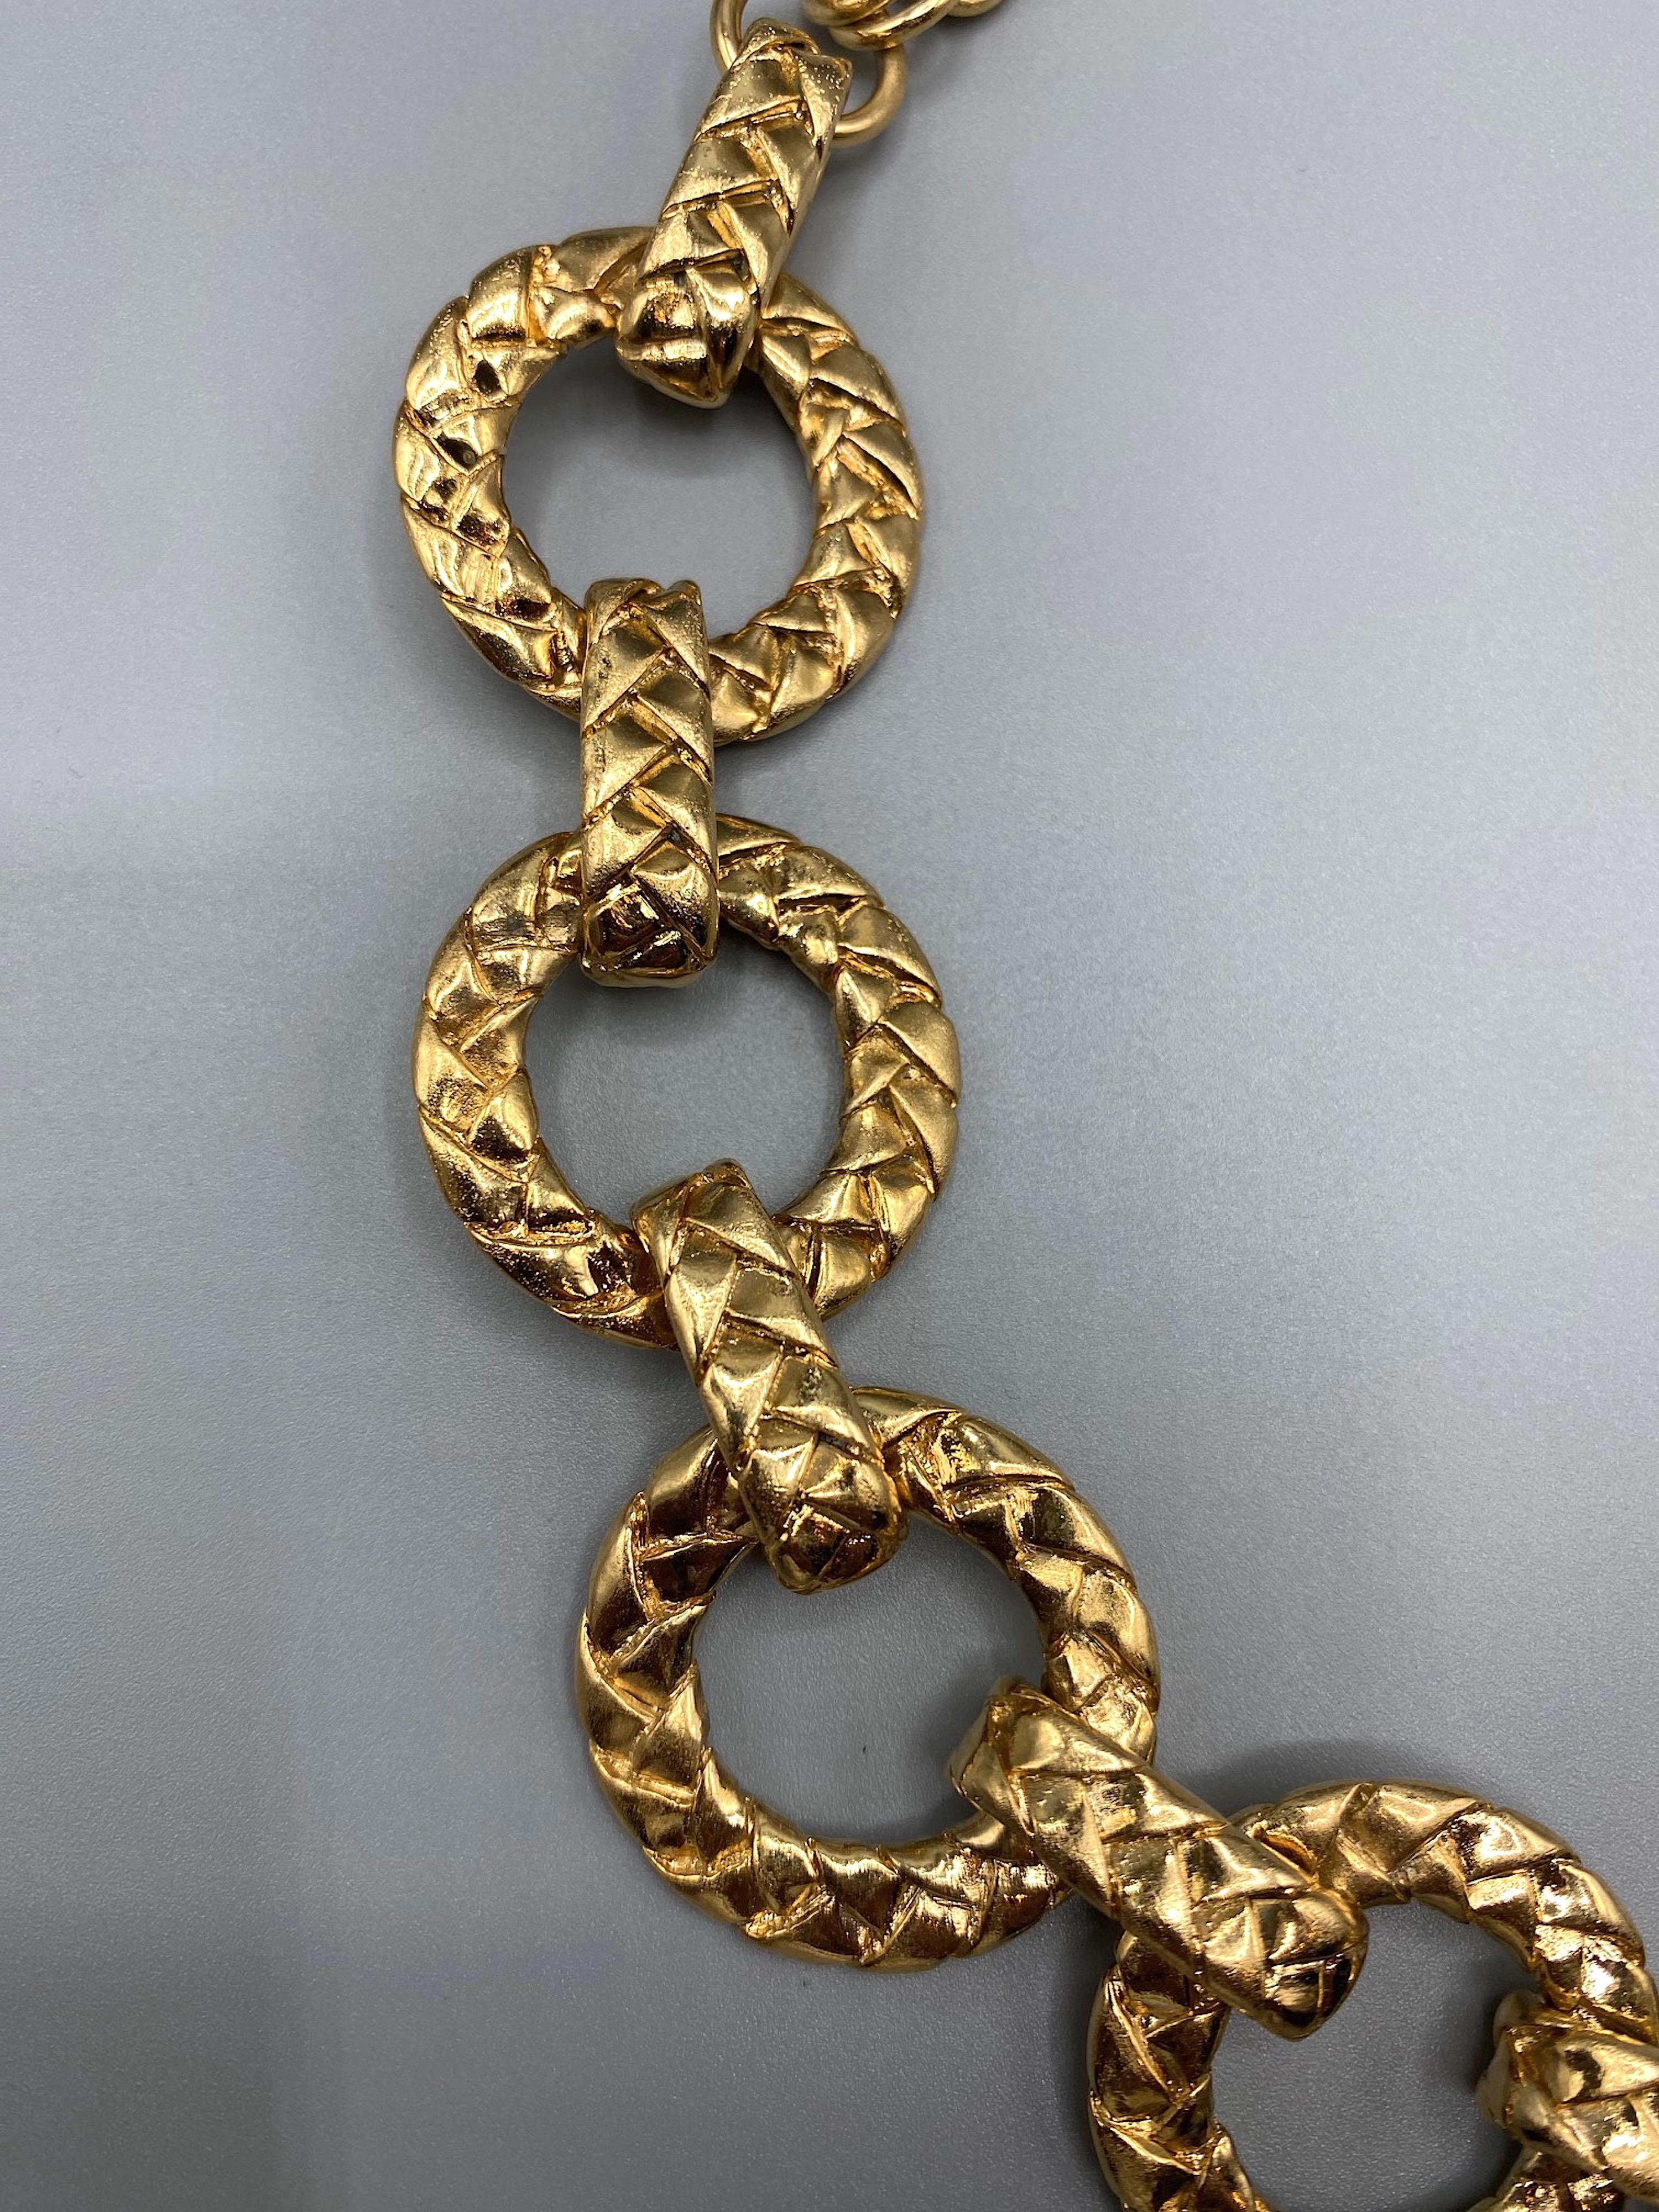 Yves Saint Laurent 1980's Round Quilt Link Chain Necklace In Good Condition For Sale In New York, NY